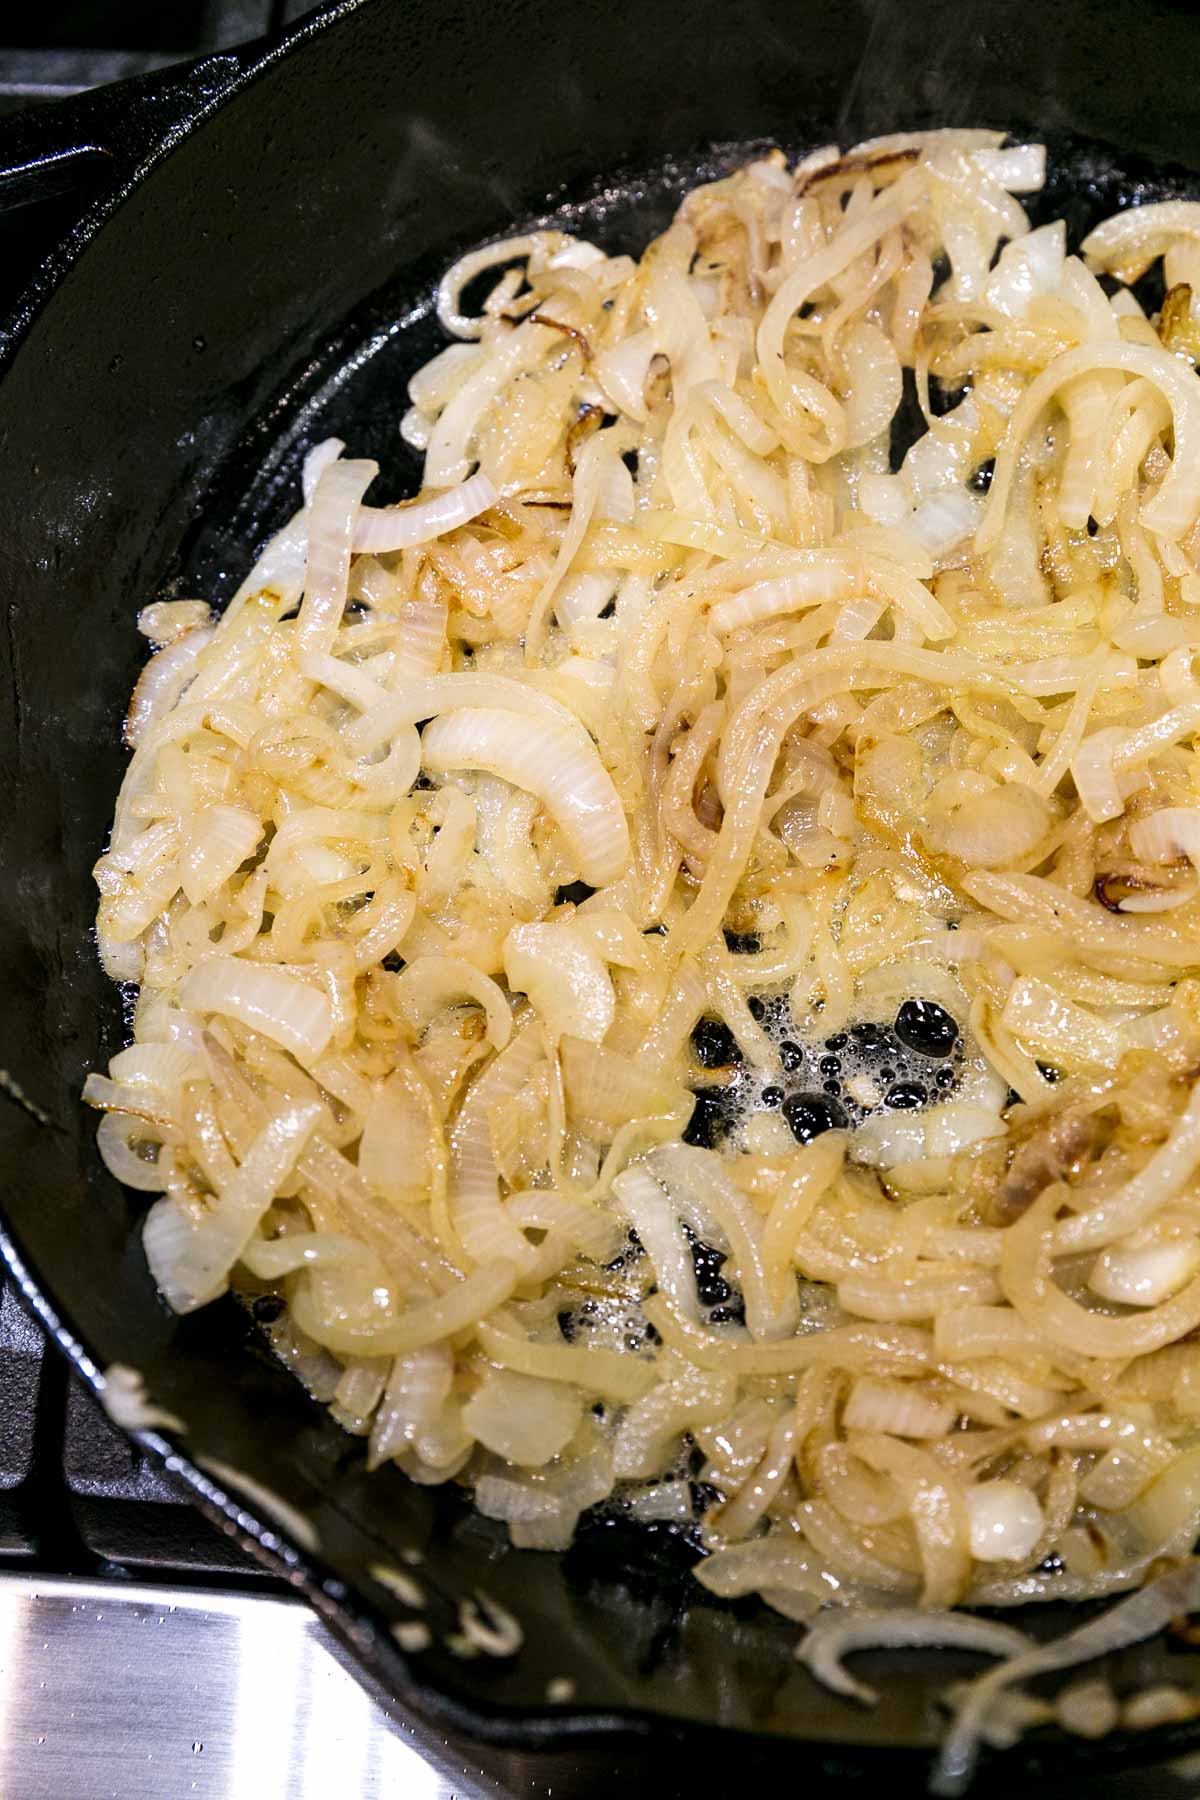 caramelized onions in a cast iron skillet just starting to turn golden